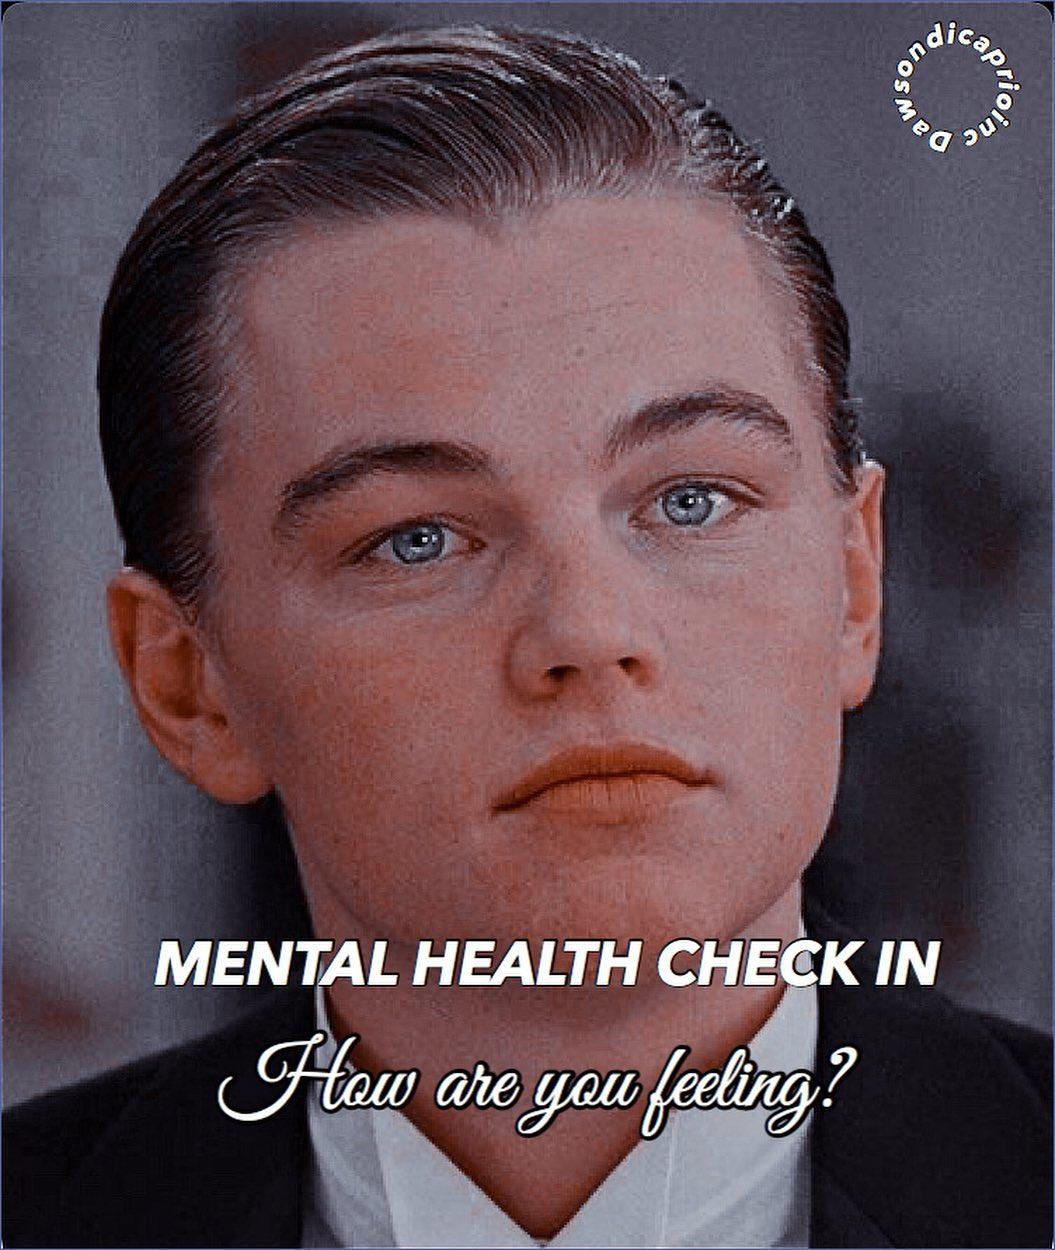 Leonardo DiCaprio Memes Only the Best for Hollywood's Best